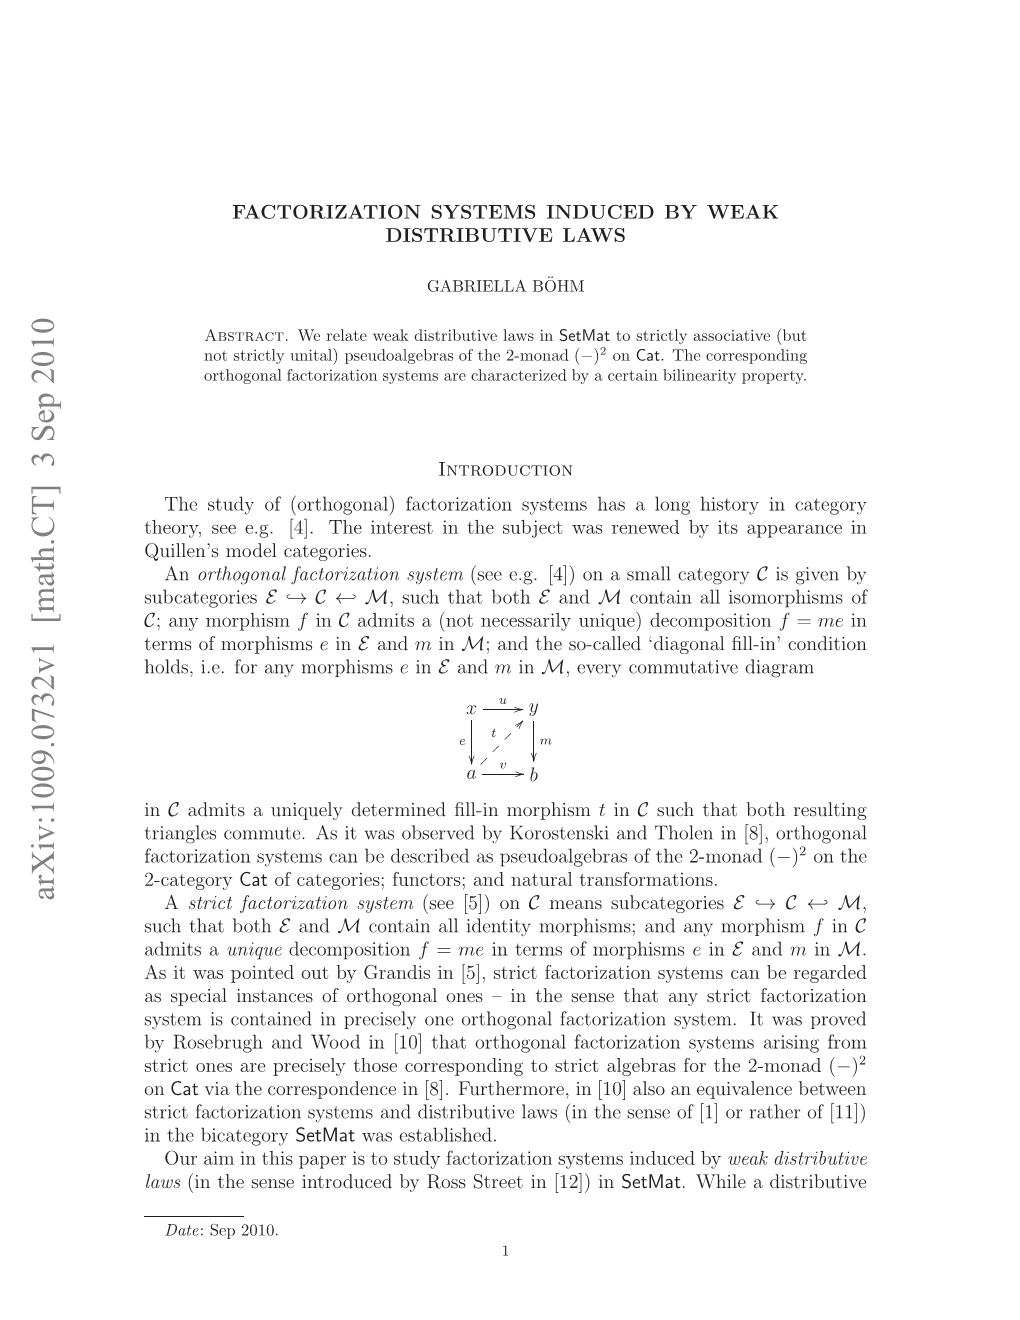 Factorization Systems Induced by Weak Distributive Laws 3